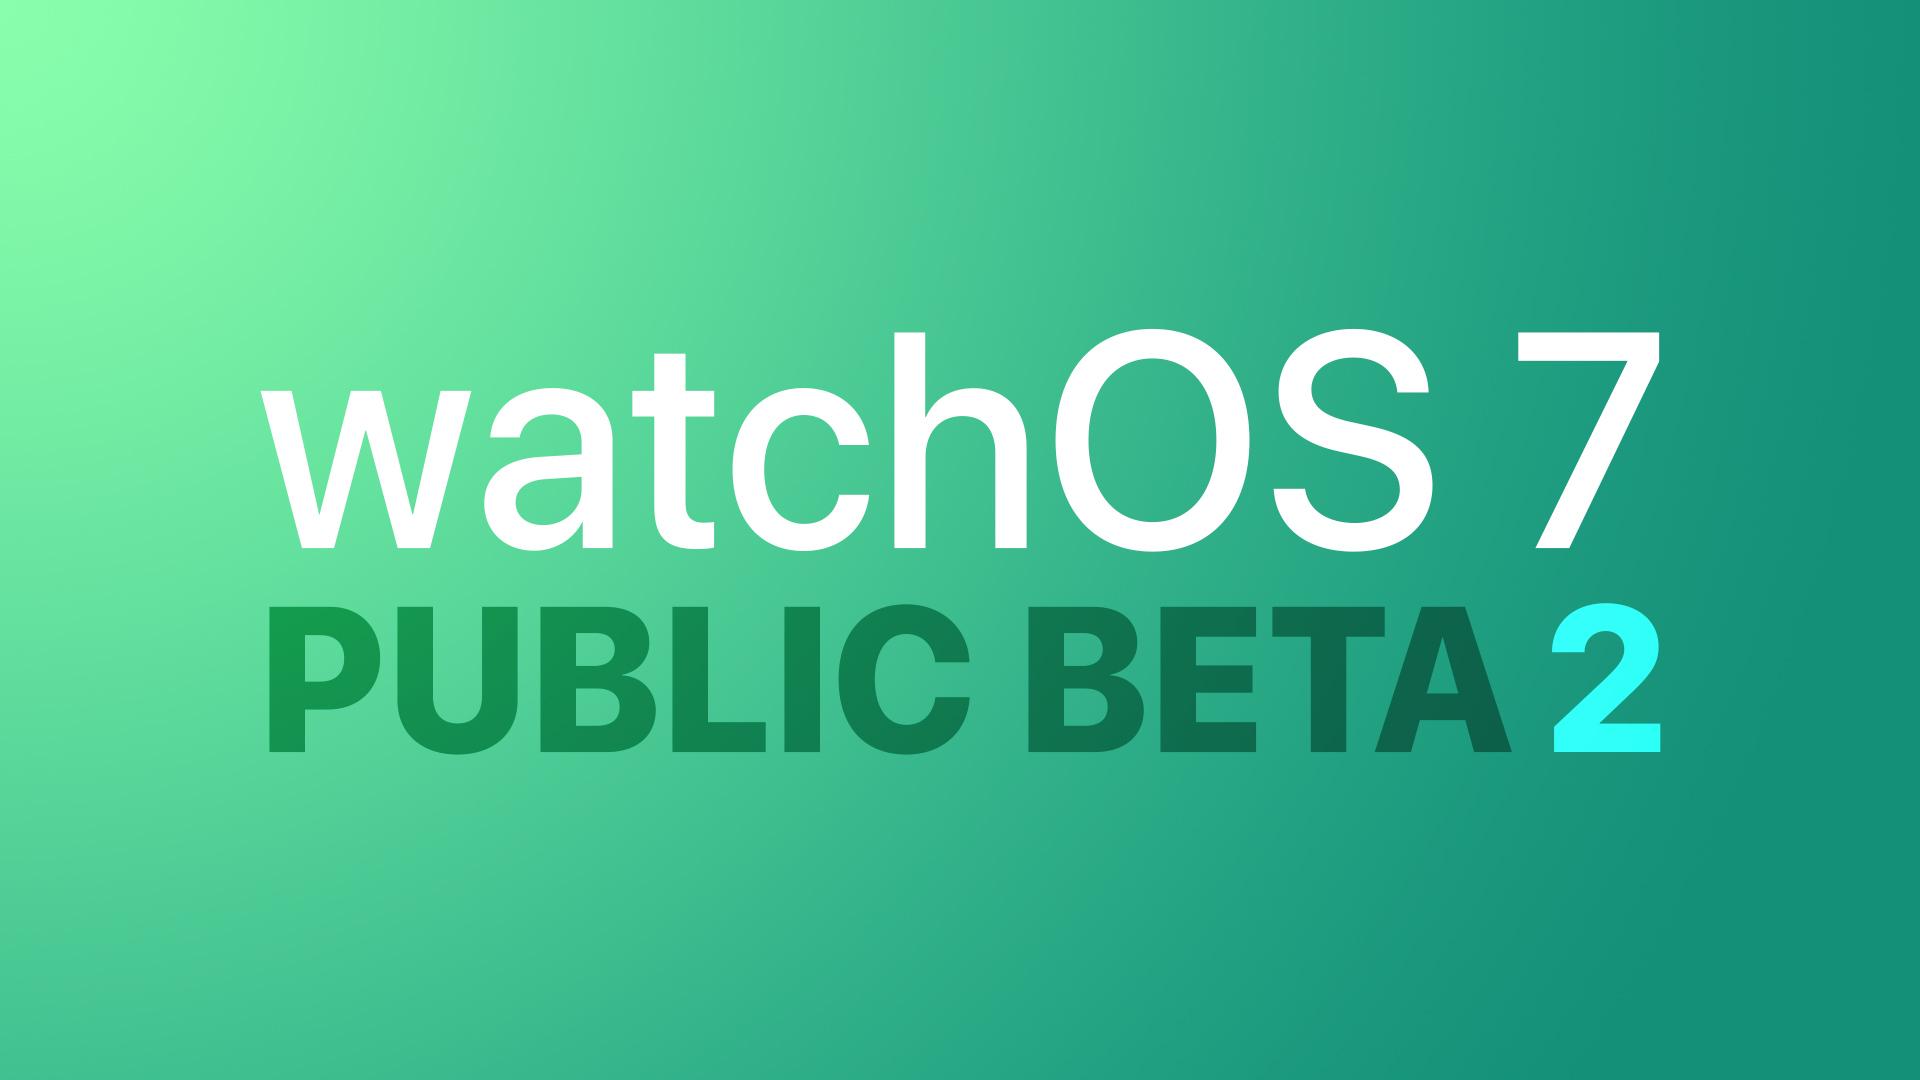 Apple Releases 2nd Beta of watchOS 7 to Public Beta Testers